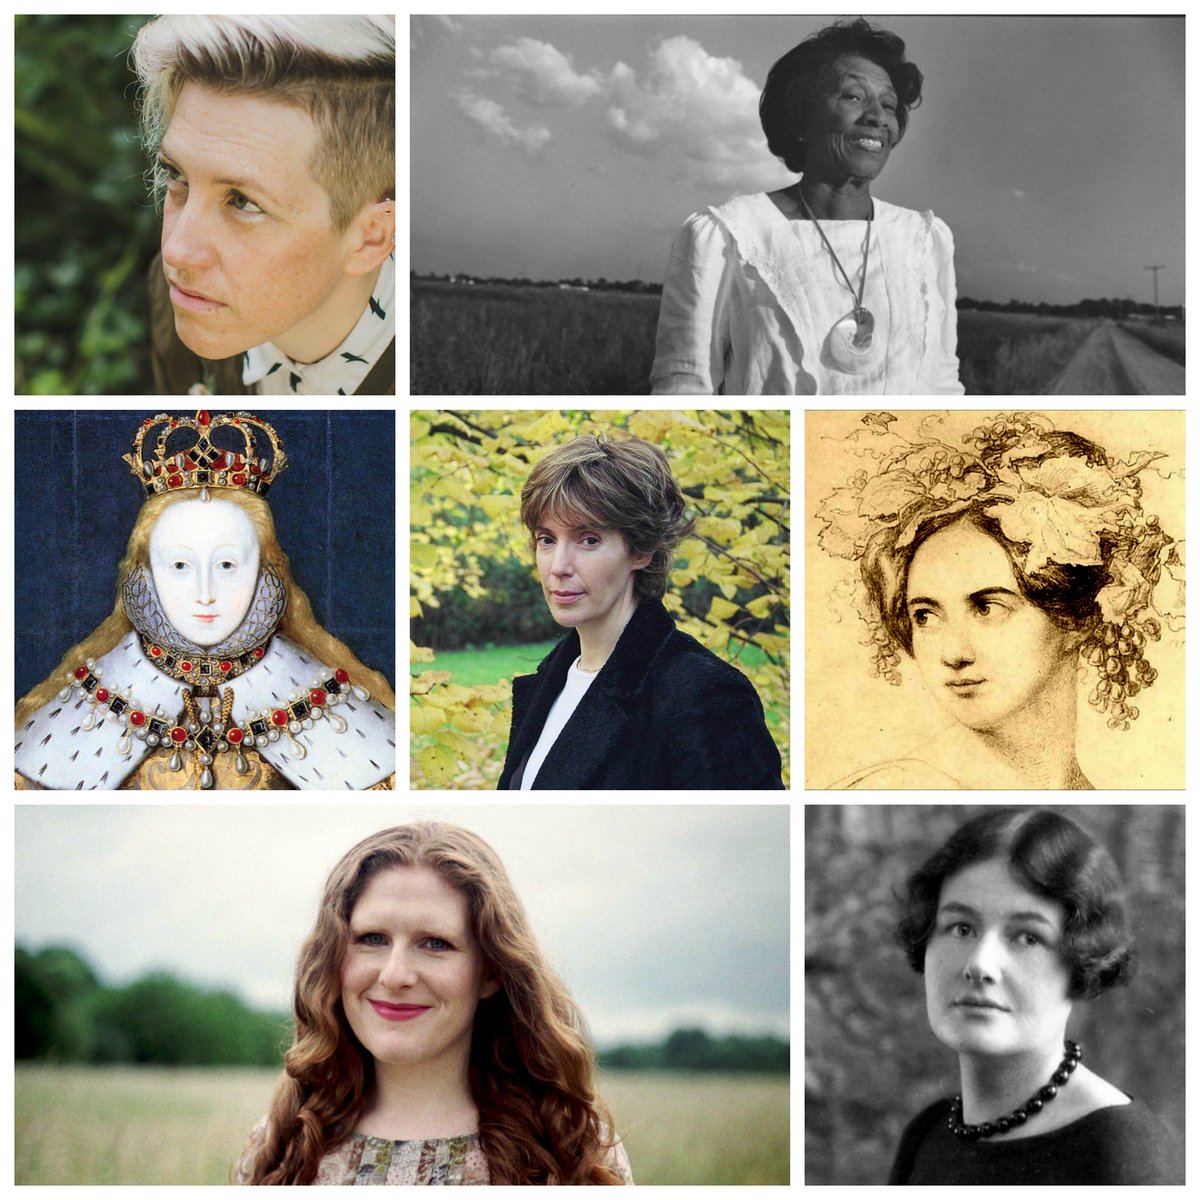 We hope you enjoyed our countdown focusing on some of the inspirational figures & composers we celebrate this w/e! Join us on Saturday, 6.30pm at St George the Martyr: bit.ly/WomenOfNote2019 @kj_funk #UndineMoore #QEI #CeciliaMcdowall #FannyMendelssohn @CherylHoad #RebeccaClarke